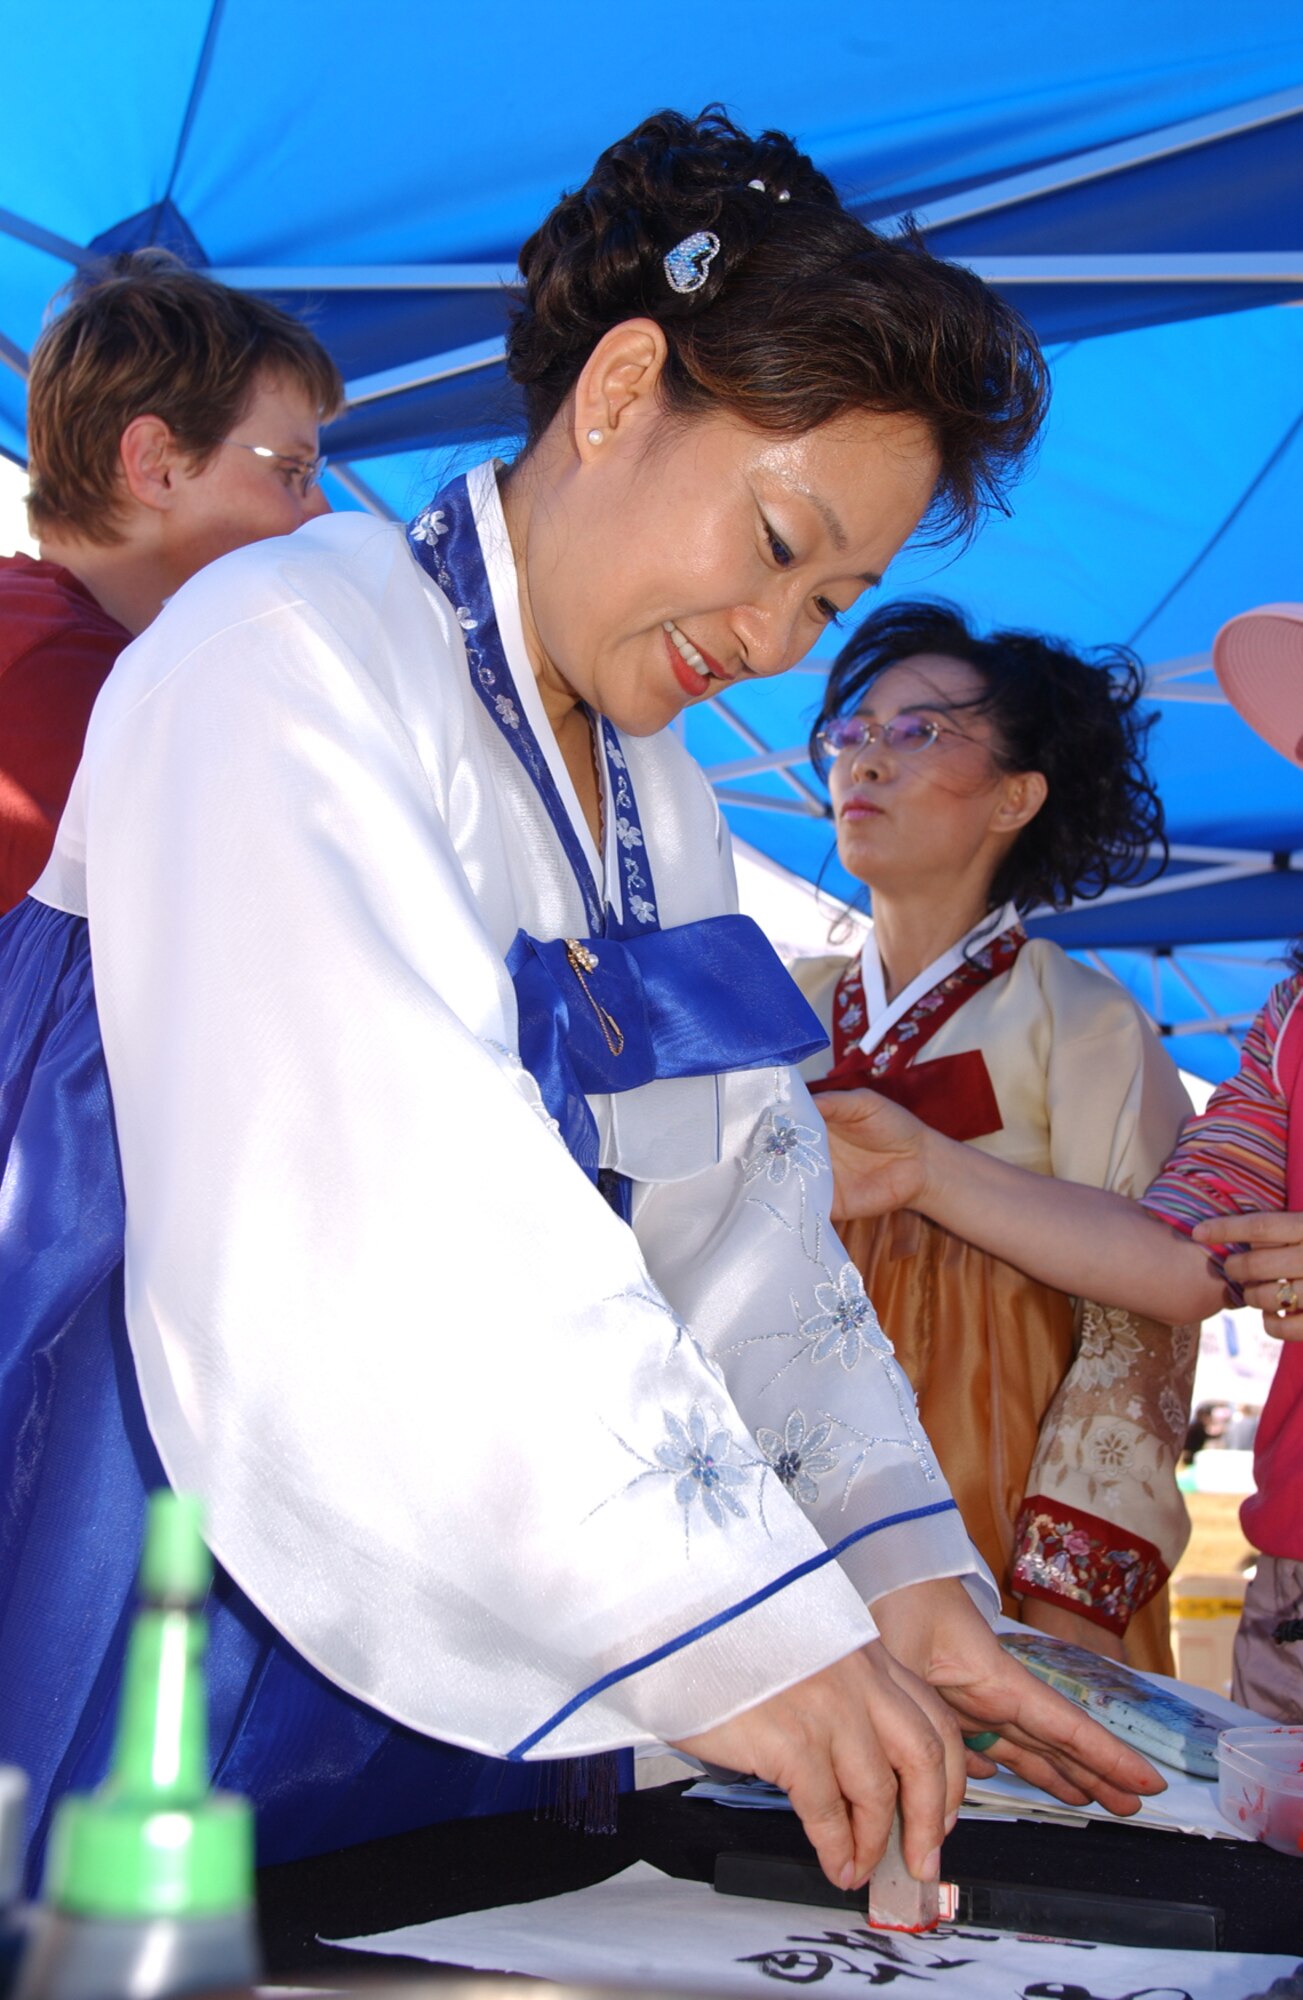 OSAN AIR BASE, Republic of Korea --  One of several traditional activities shown by Koreans during Osan’s 2006 Air Power Day was Calligraphy. They also performed several traditional dances and games, and provided a food tasting. (U.S. Air Force photo by Airman Jason Epley)